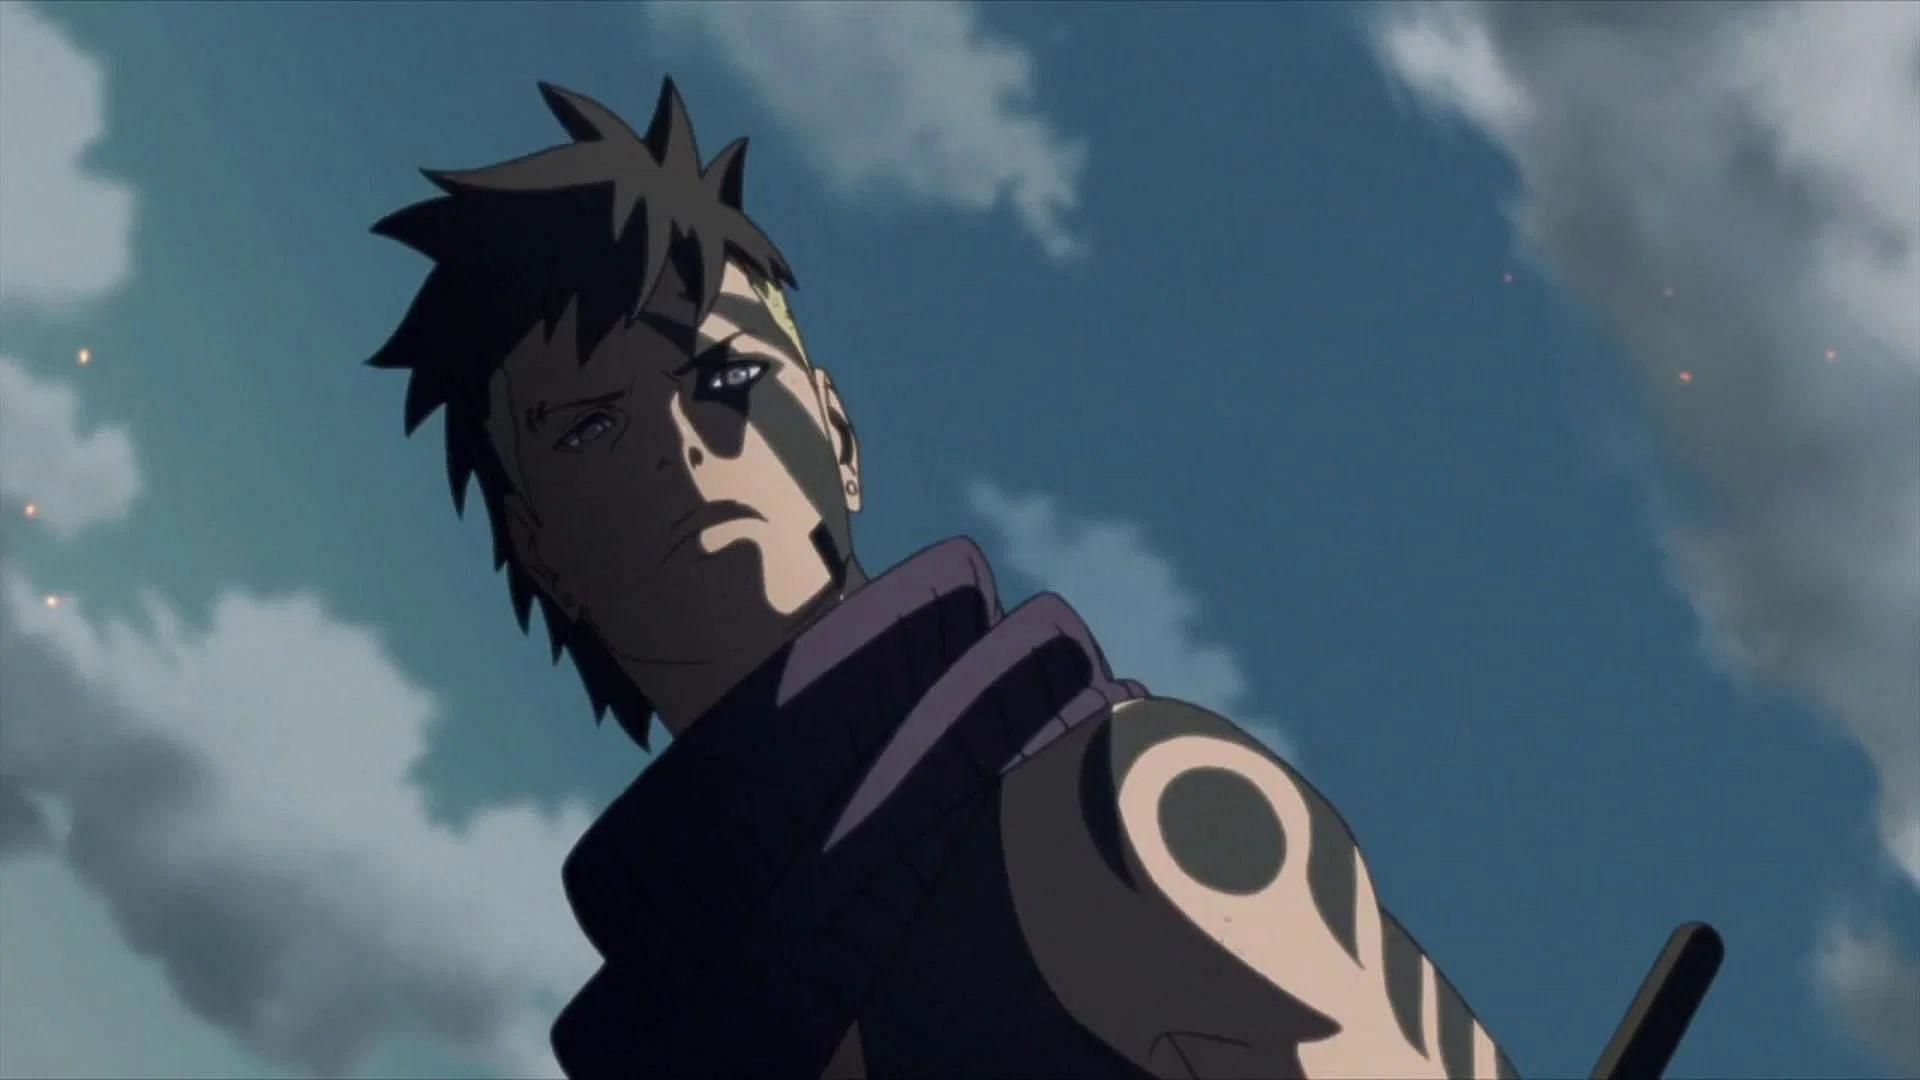 Kawaki has been shown wearing a scarf after the time skip (Image via Studio Pierrot)